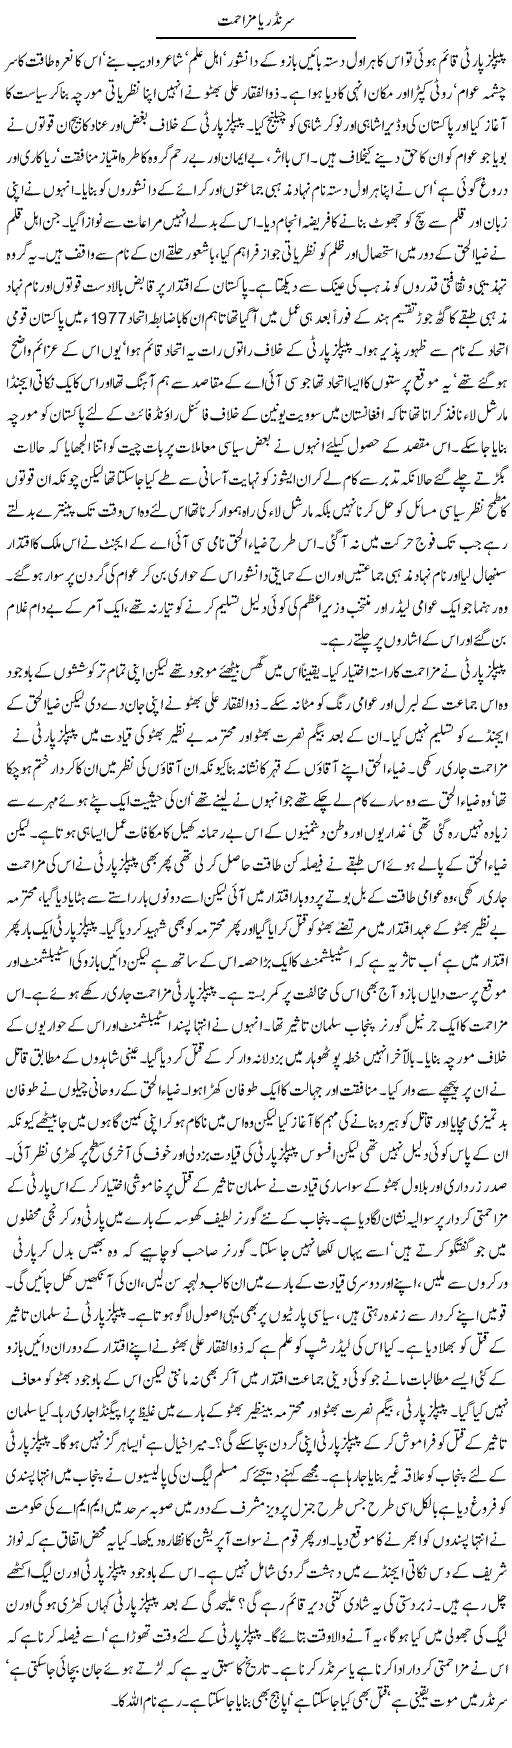 Peoples Party Express Column Latif Chaudhry 26 January 2011